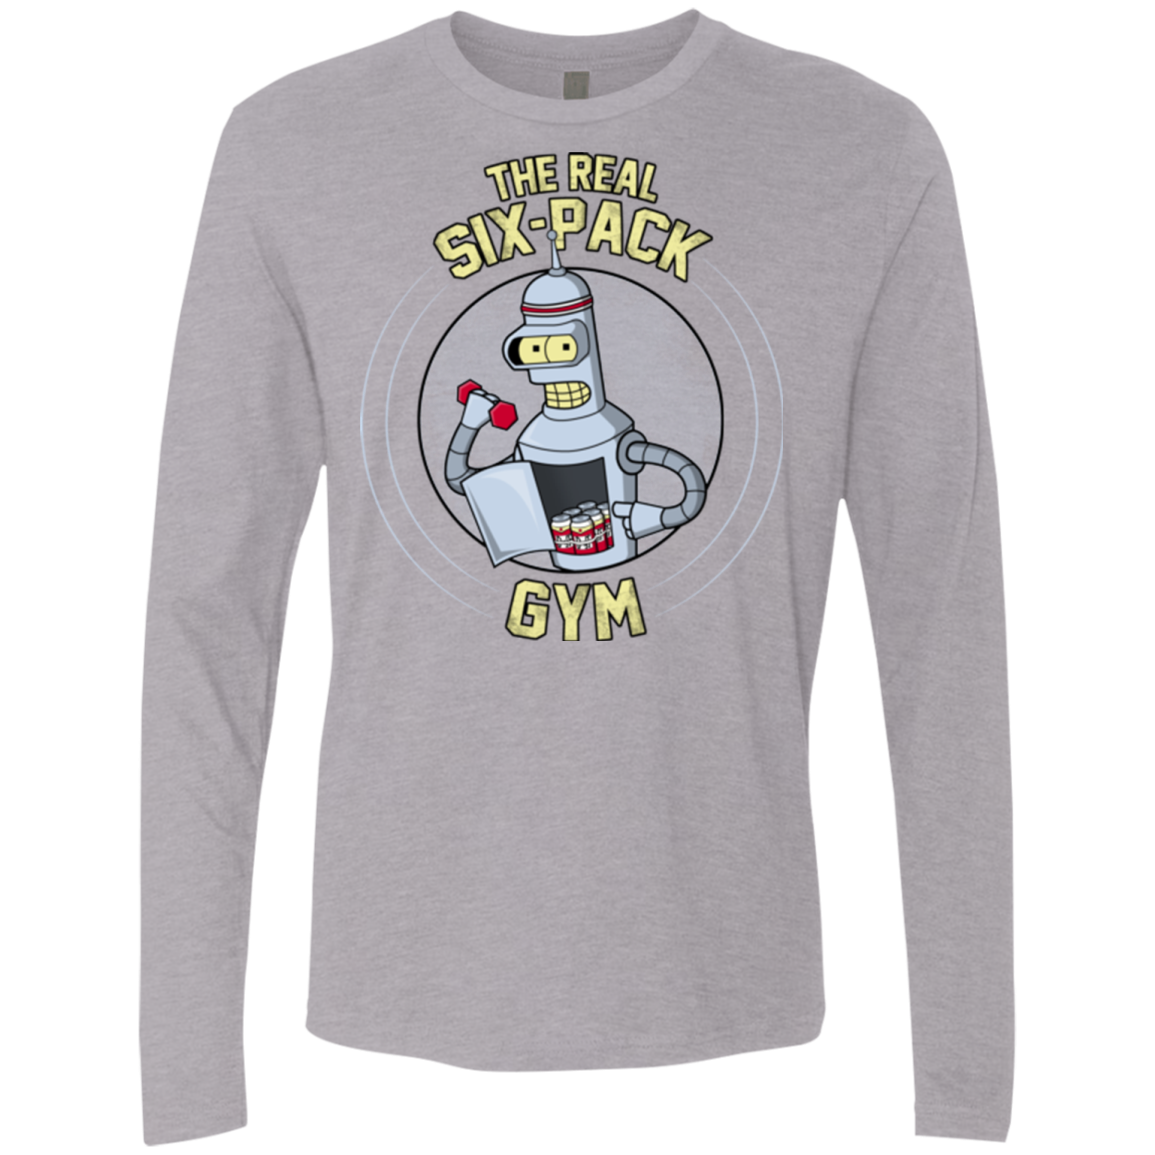 The Real Six Pack Men's Premium Long Sleeve